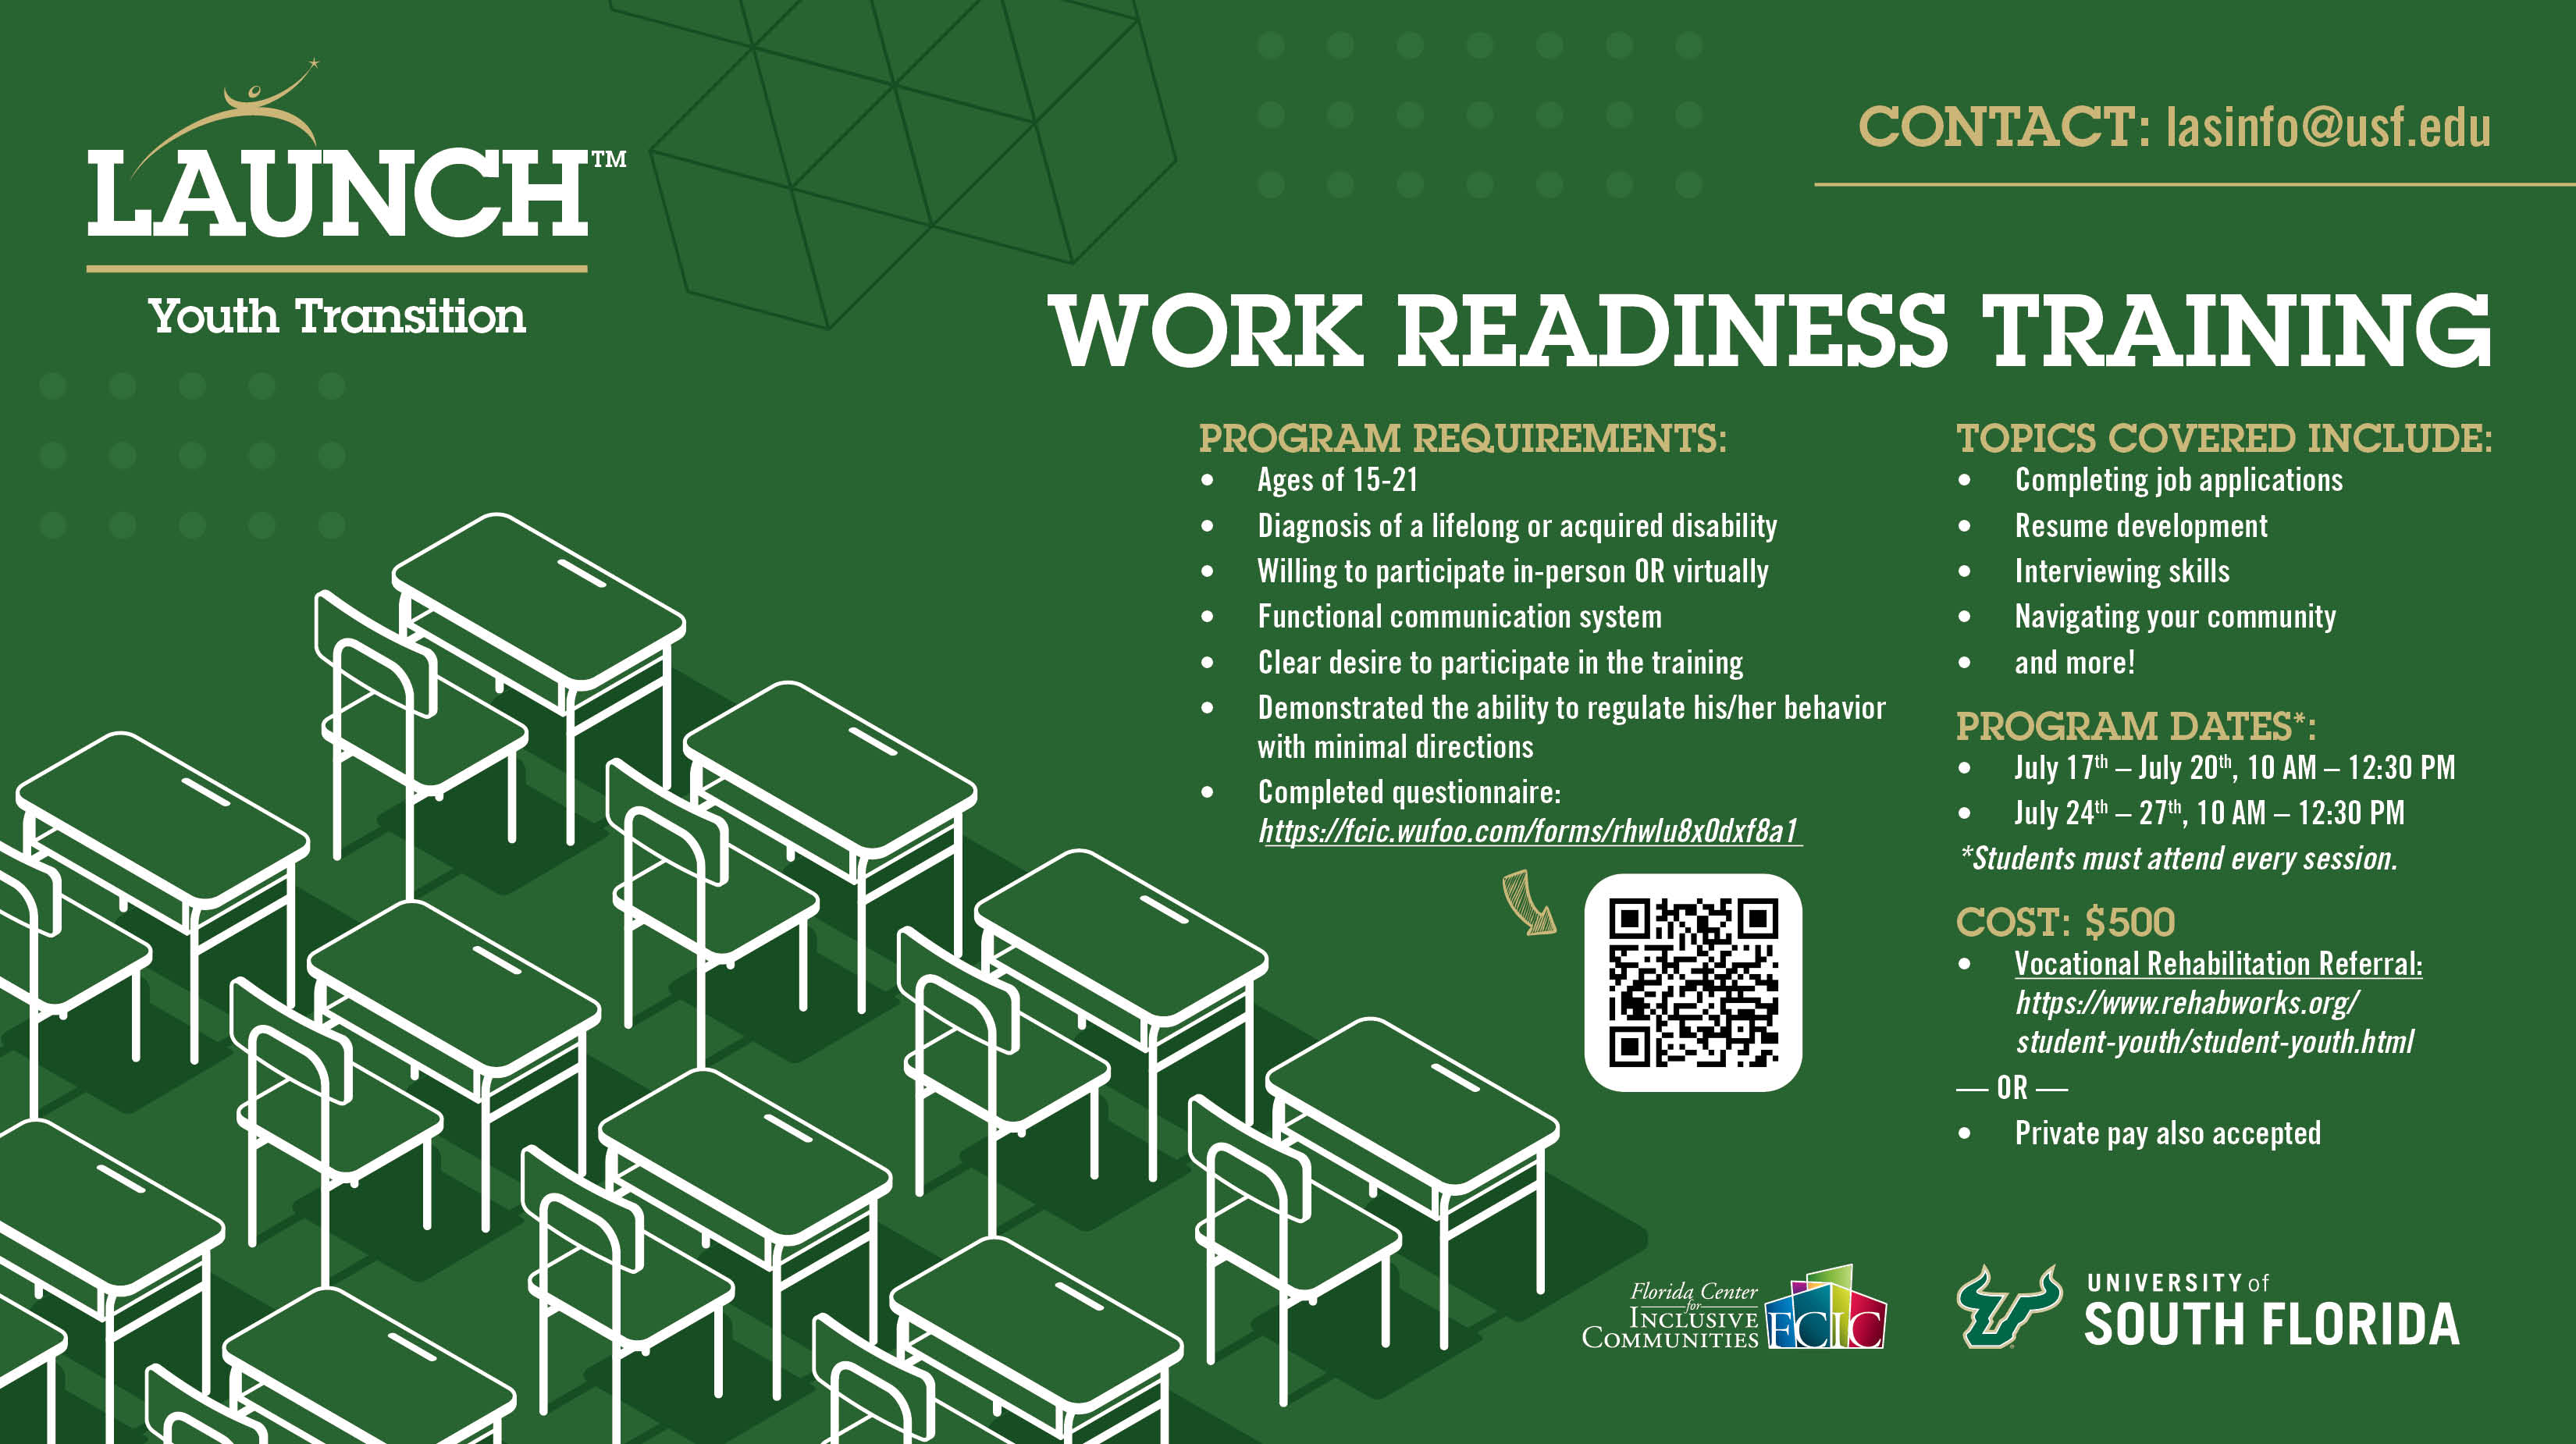 LAUNCH Work Readiness Training Flyer